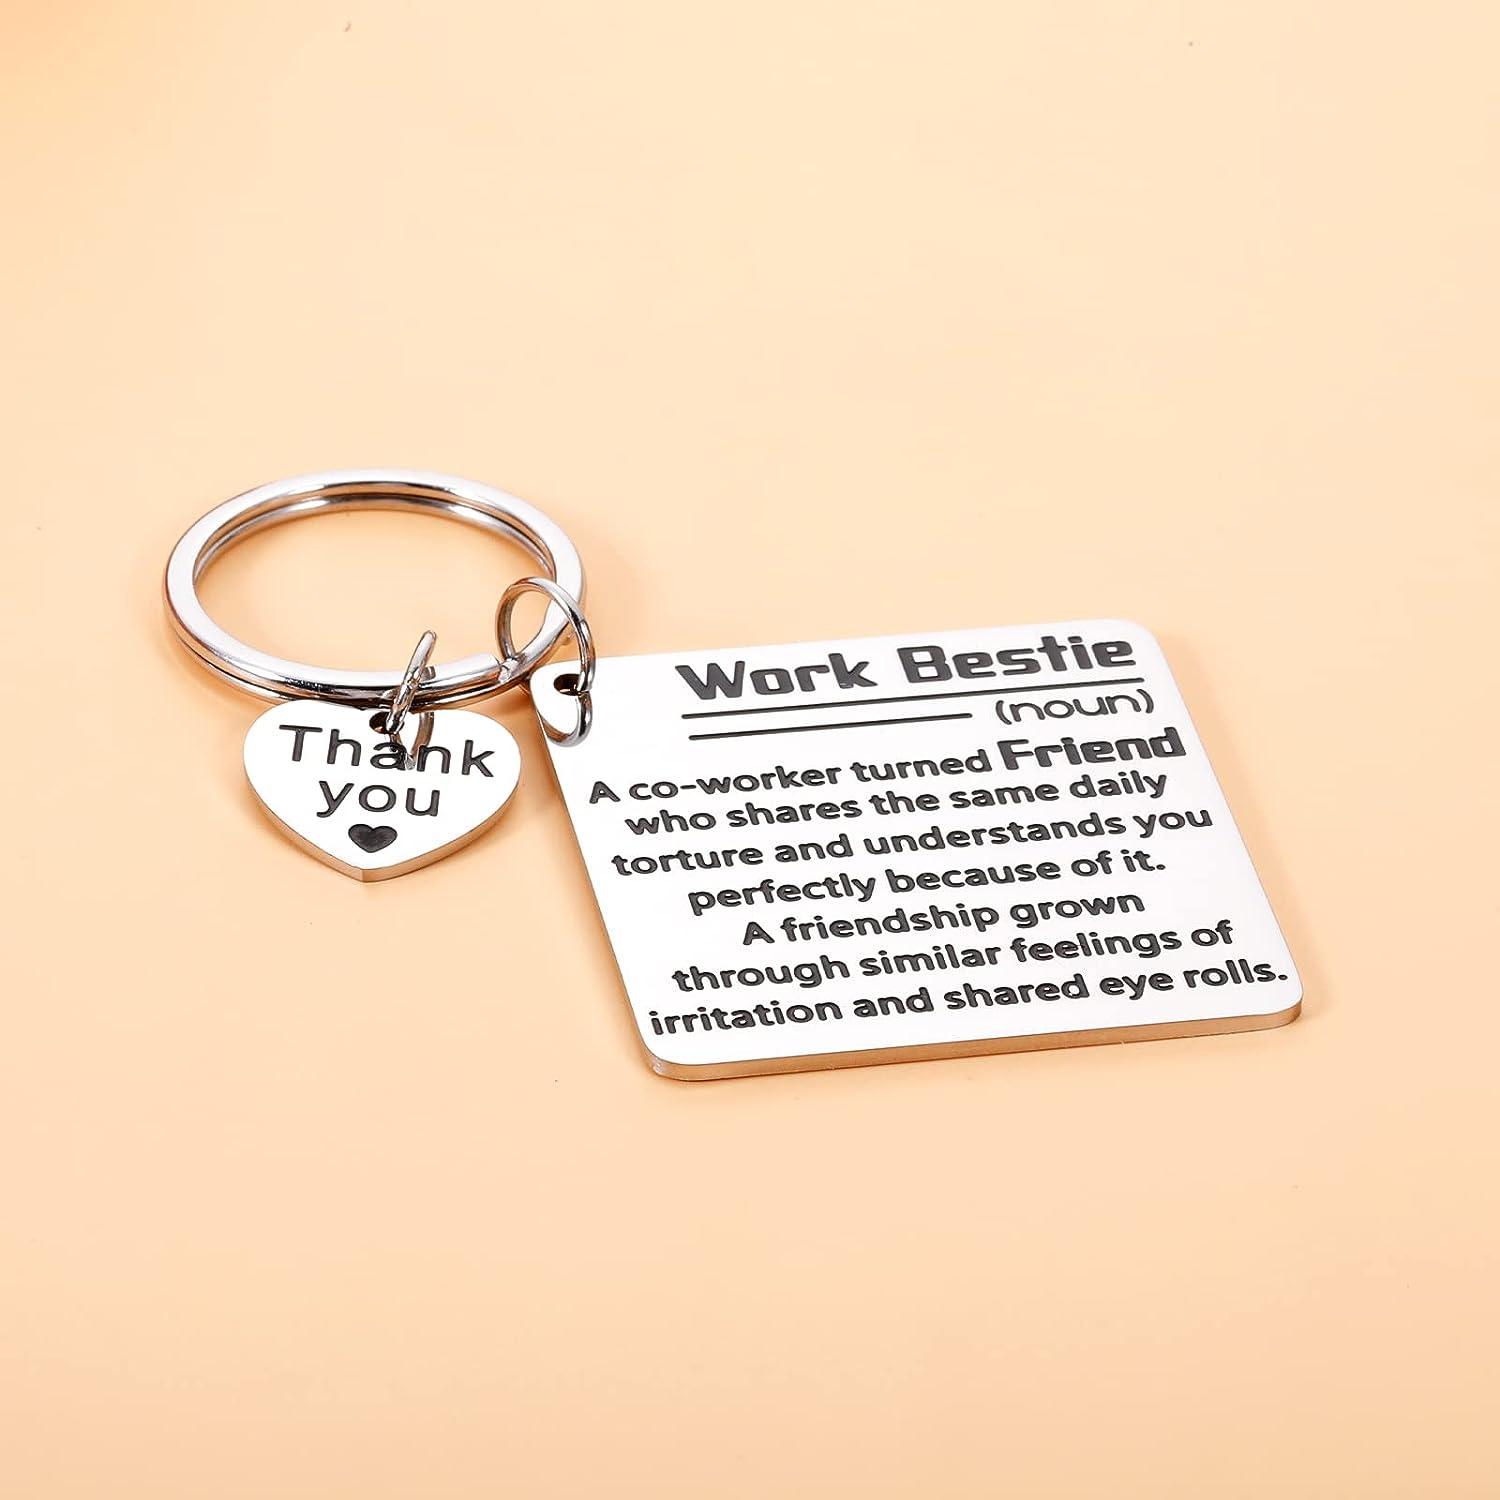 21 Bulk Gifts For Coworkers and Employee Appreciation | SwagMagic